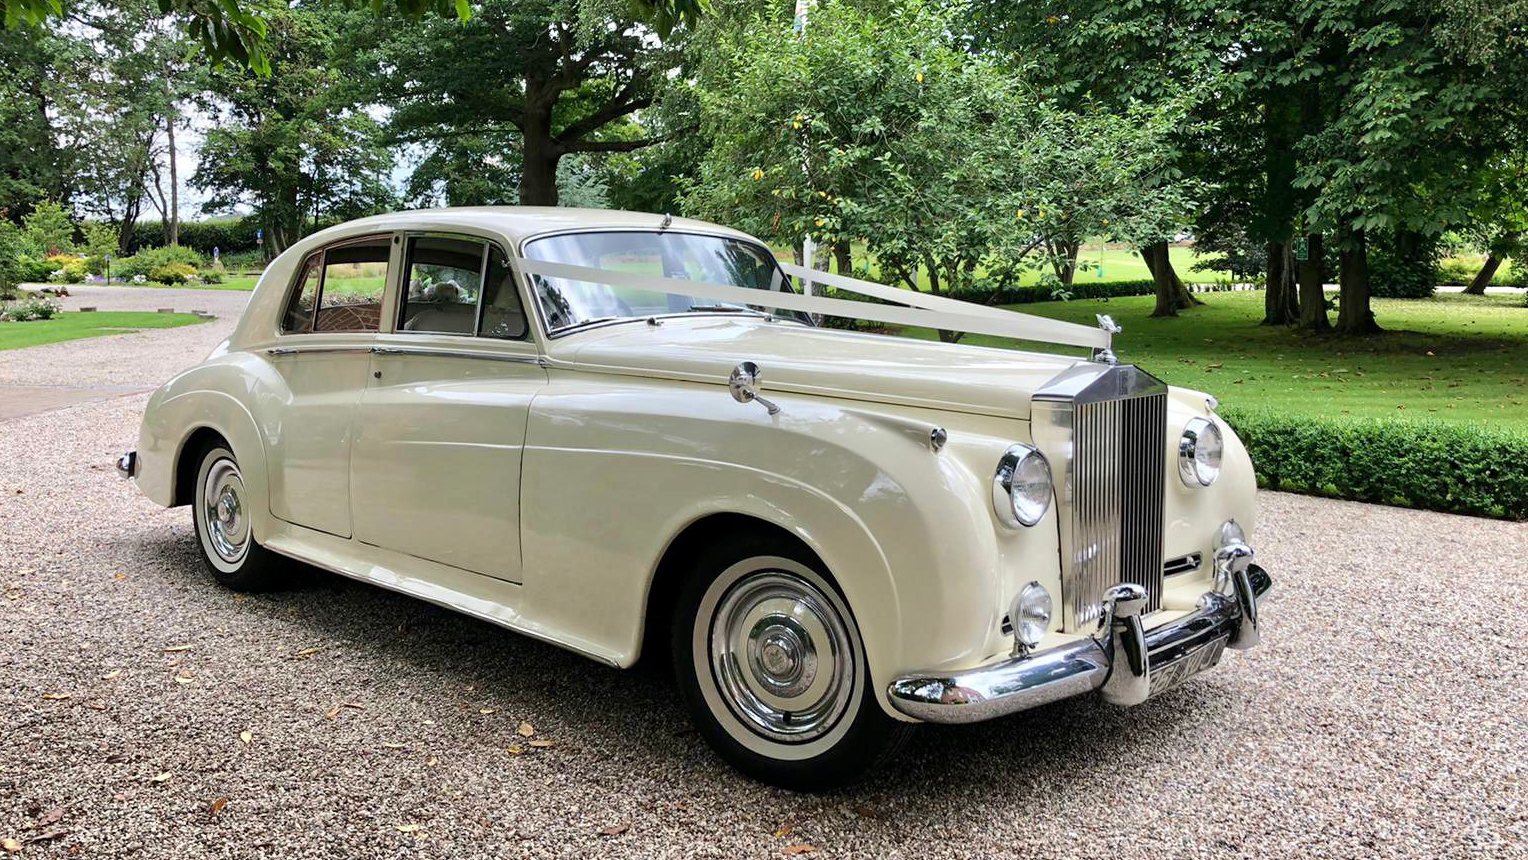 Classic Rolls-Royce Silver Cloud decorated with Ivory Ribbons at a local St Albans park with green trees in the background